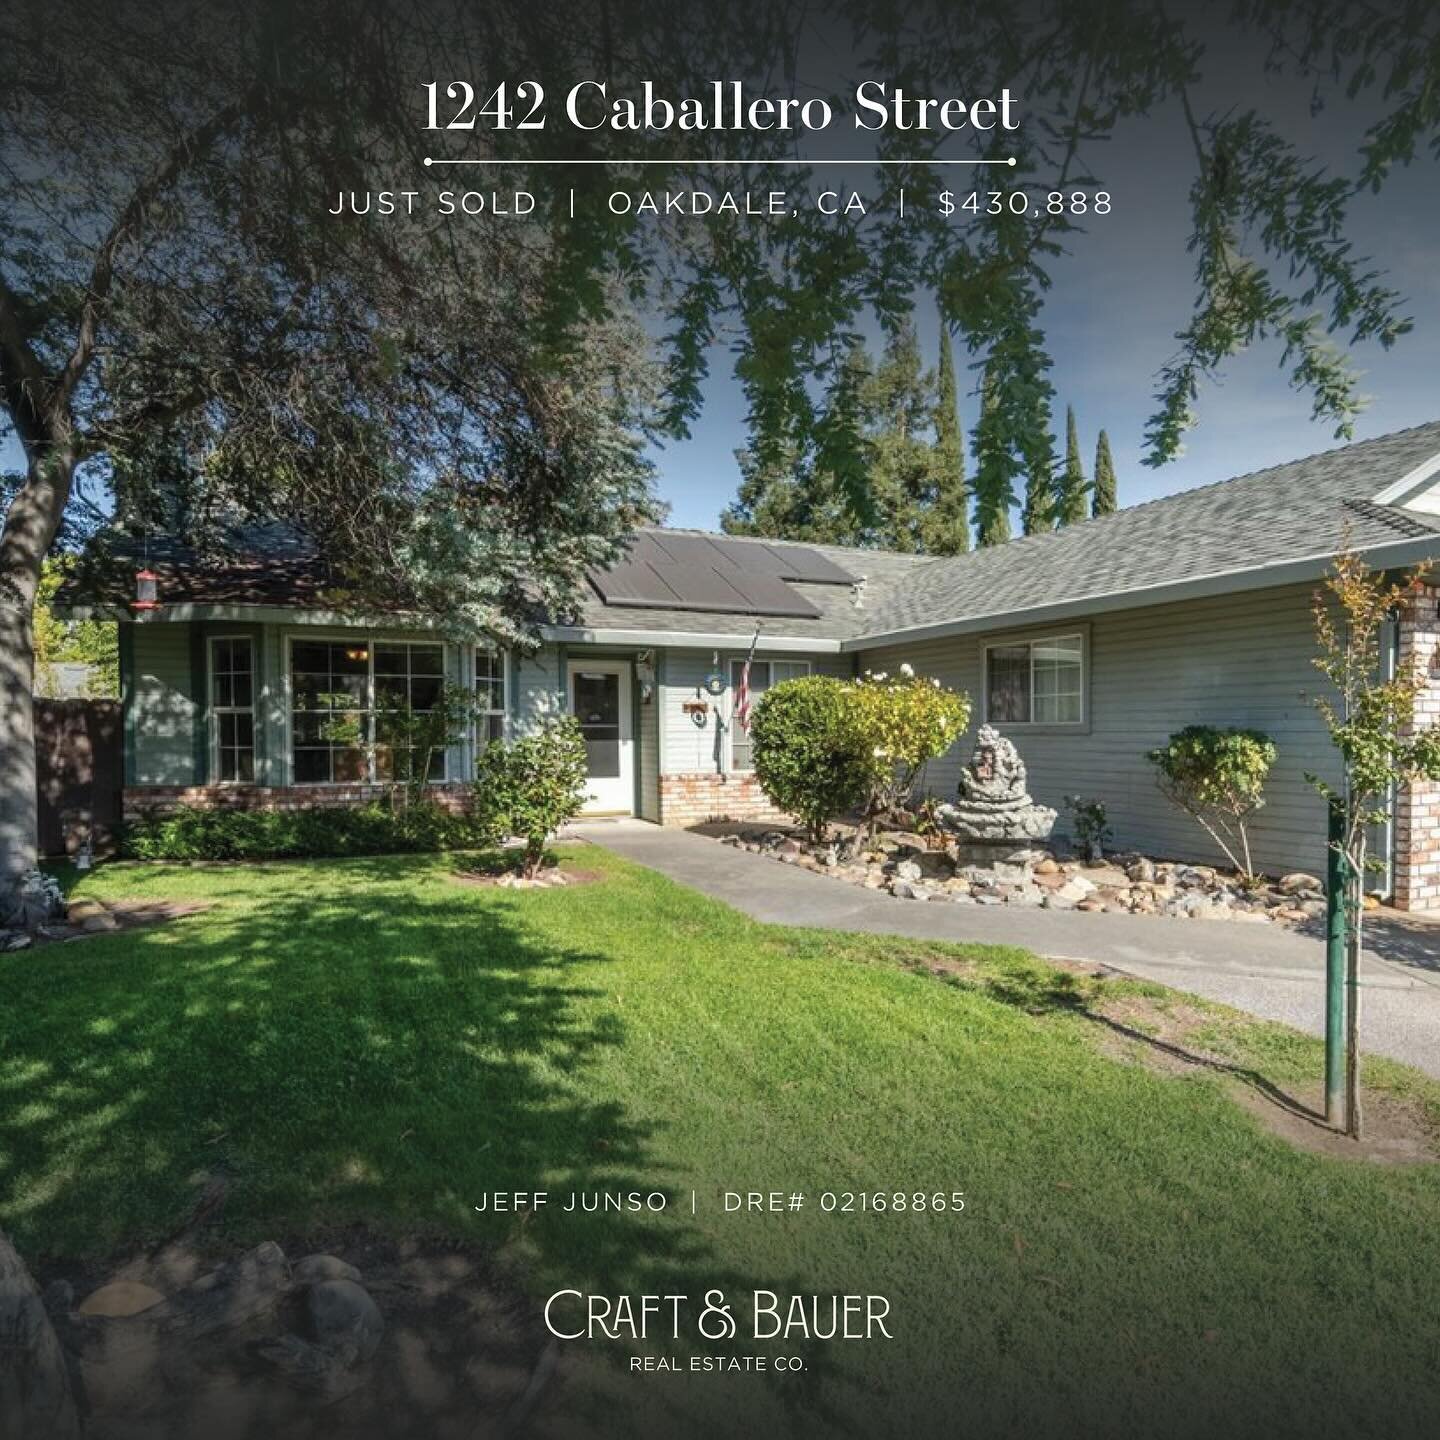 JUST SOLD 🤩 Congratulations to the new owners of this gorgeous 3-bedroom home!⁠
⁠
🏡 1242 Caballero Street⁠
📍 Oakdale, CA⁠
💰 $430,888⁠
⁠
Vaulted ceilings and fireplace in the living room that opens into the dining area and kitchen. Wonderful backy